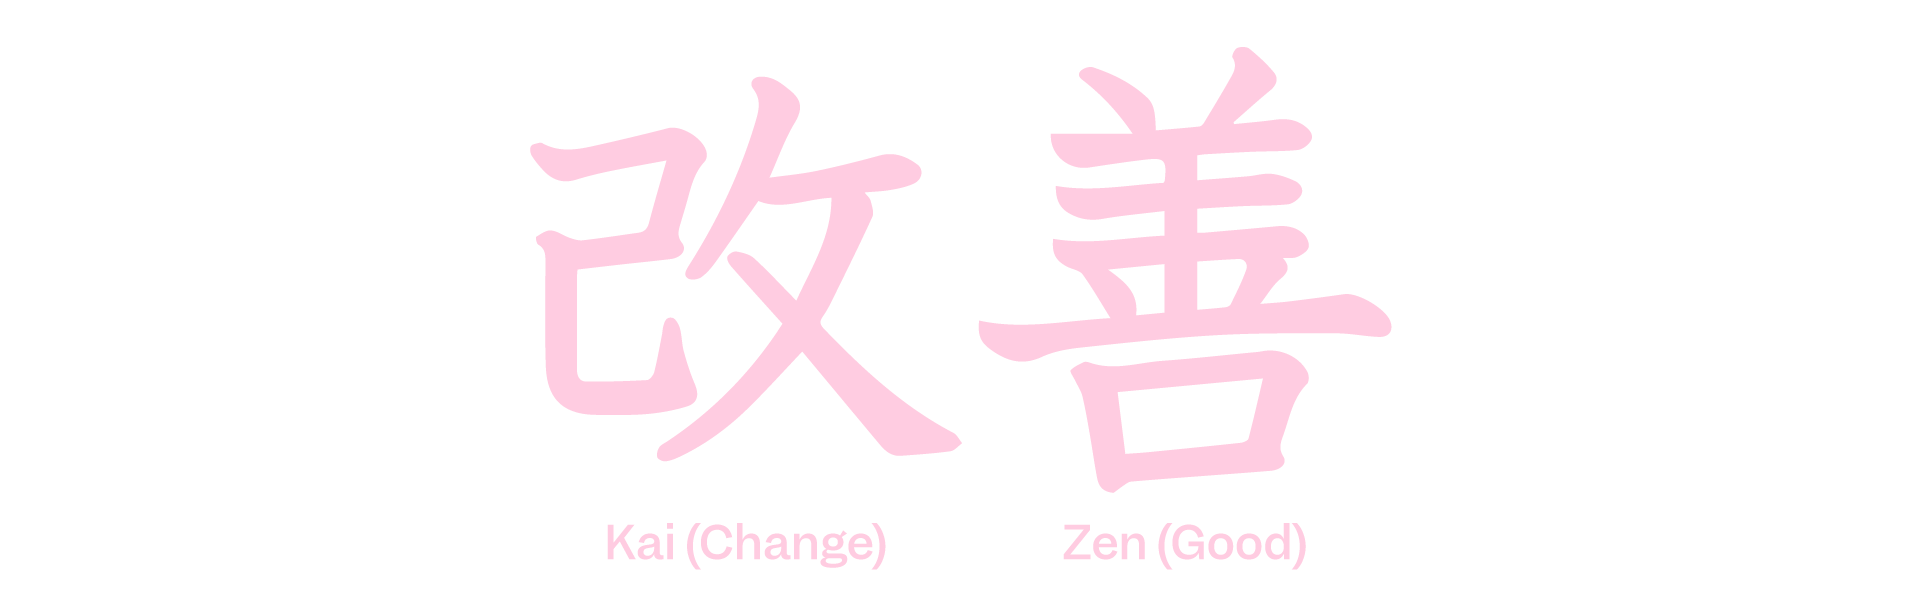 Japanese Characters that say Kai (change) and Zen (Good) to represent Kaizen methodology as part of Scilife's article about The road to continuous quality improvement